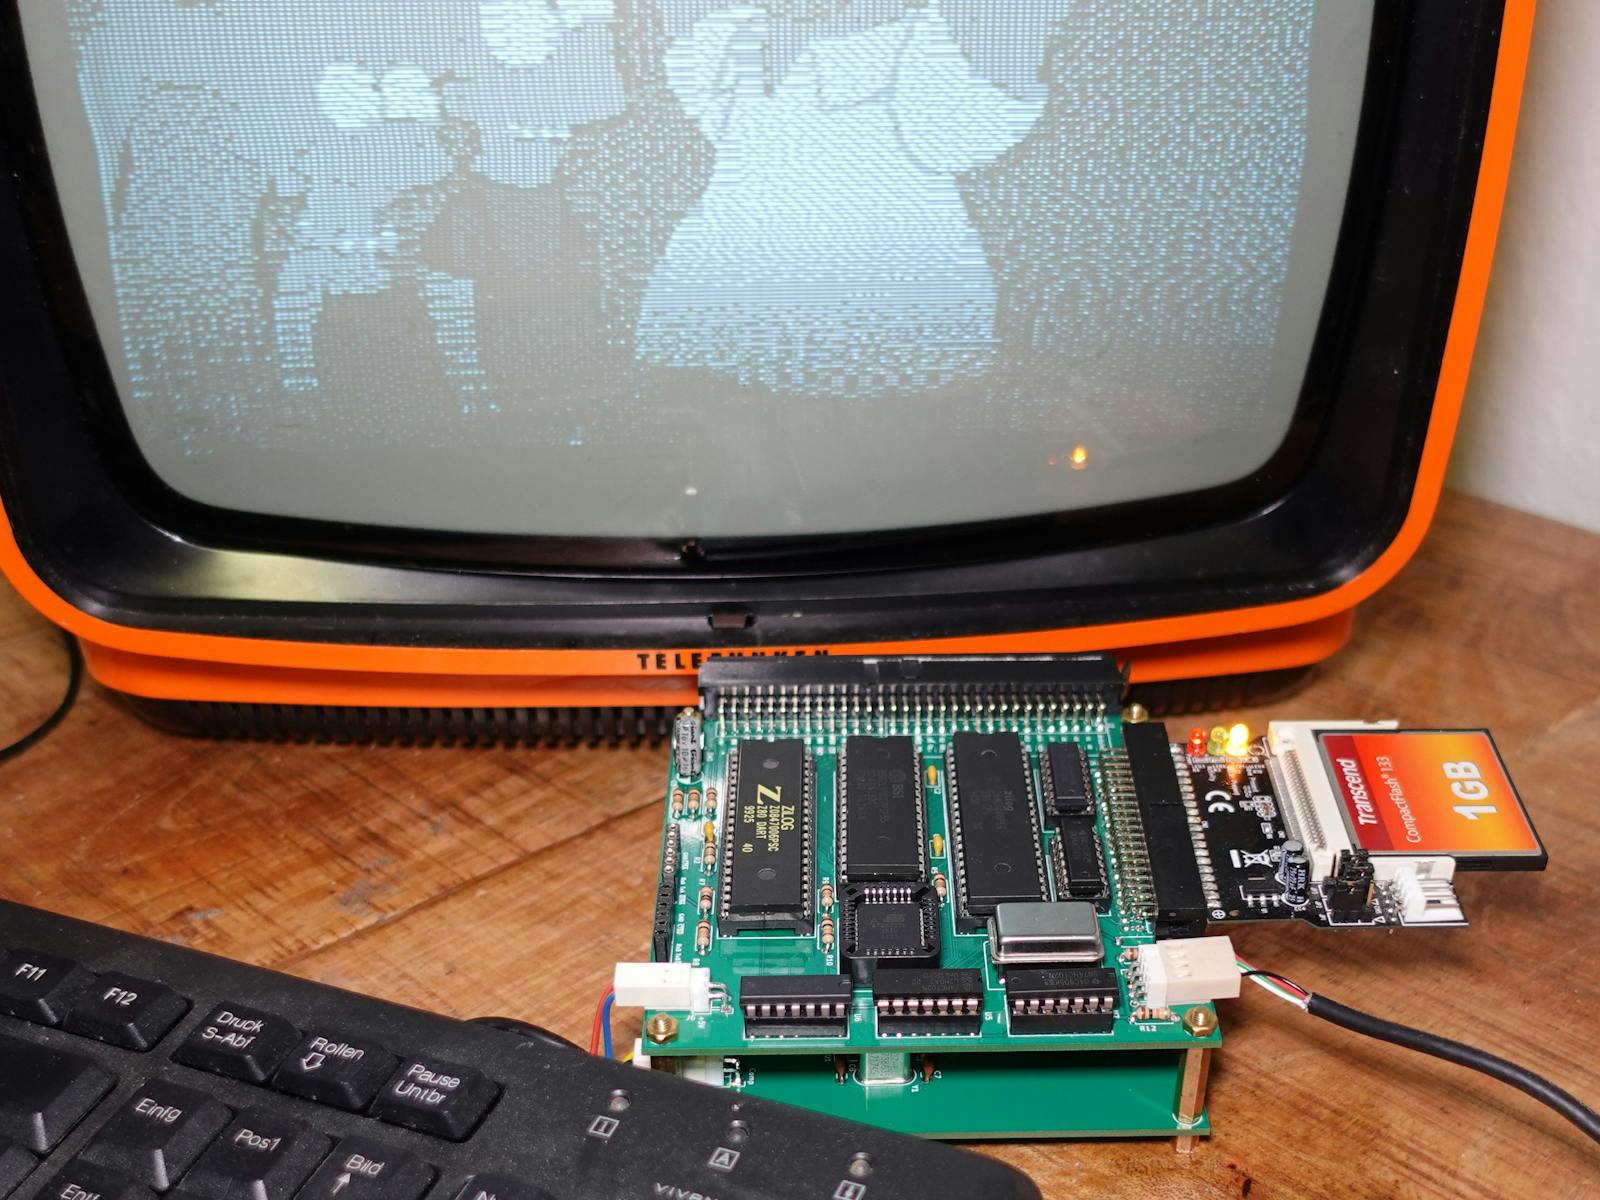 Build Your Own Z80 Home Computer - Hackster.io